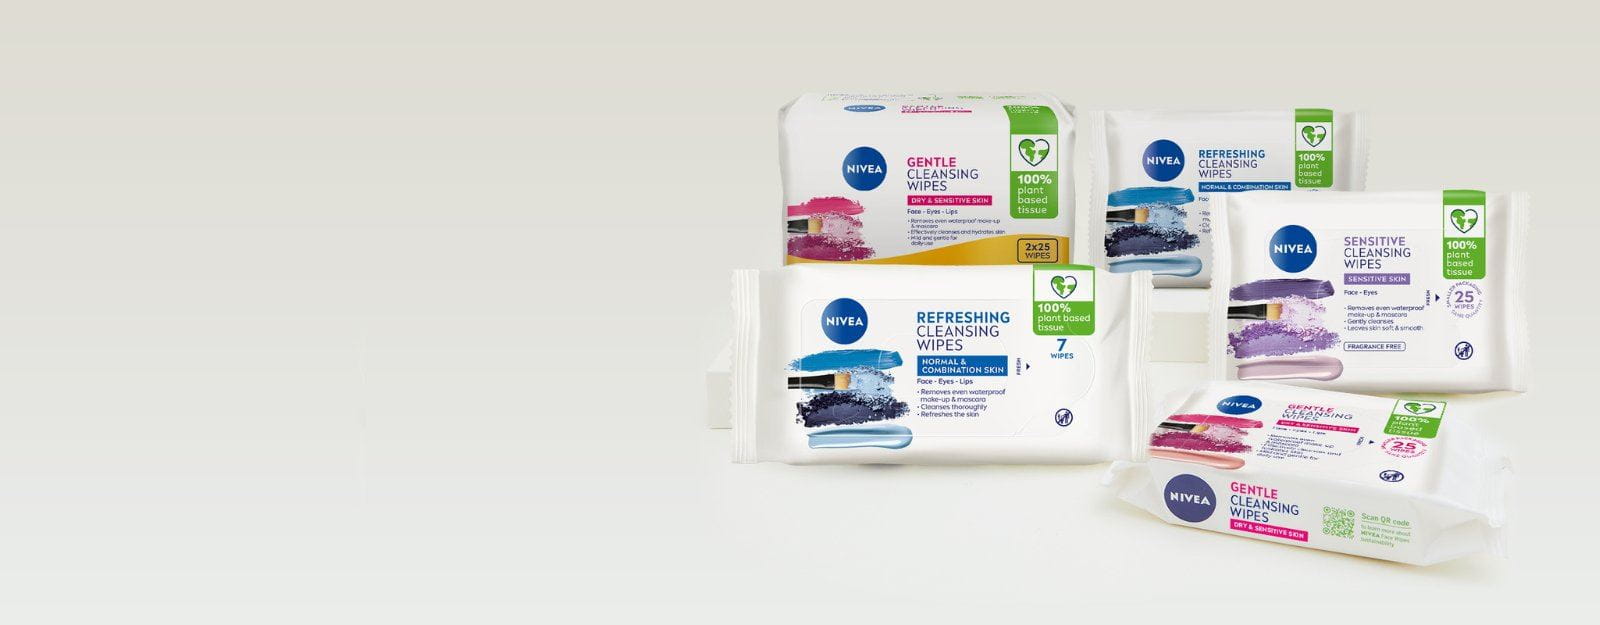 NIVEA BIODEGRADABLE FACE CLEANSING WIPES